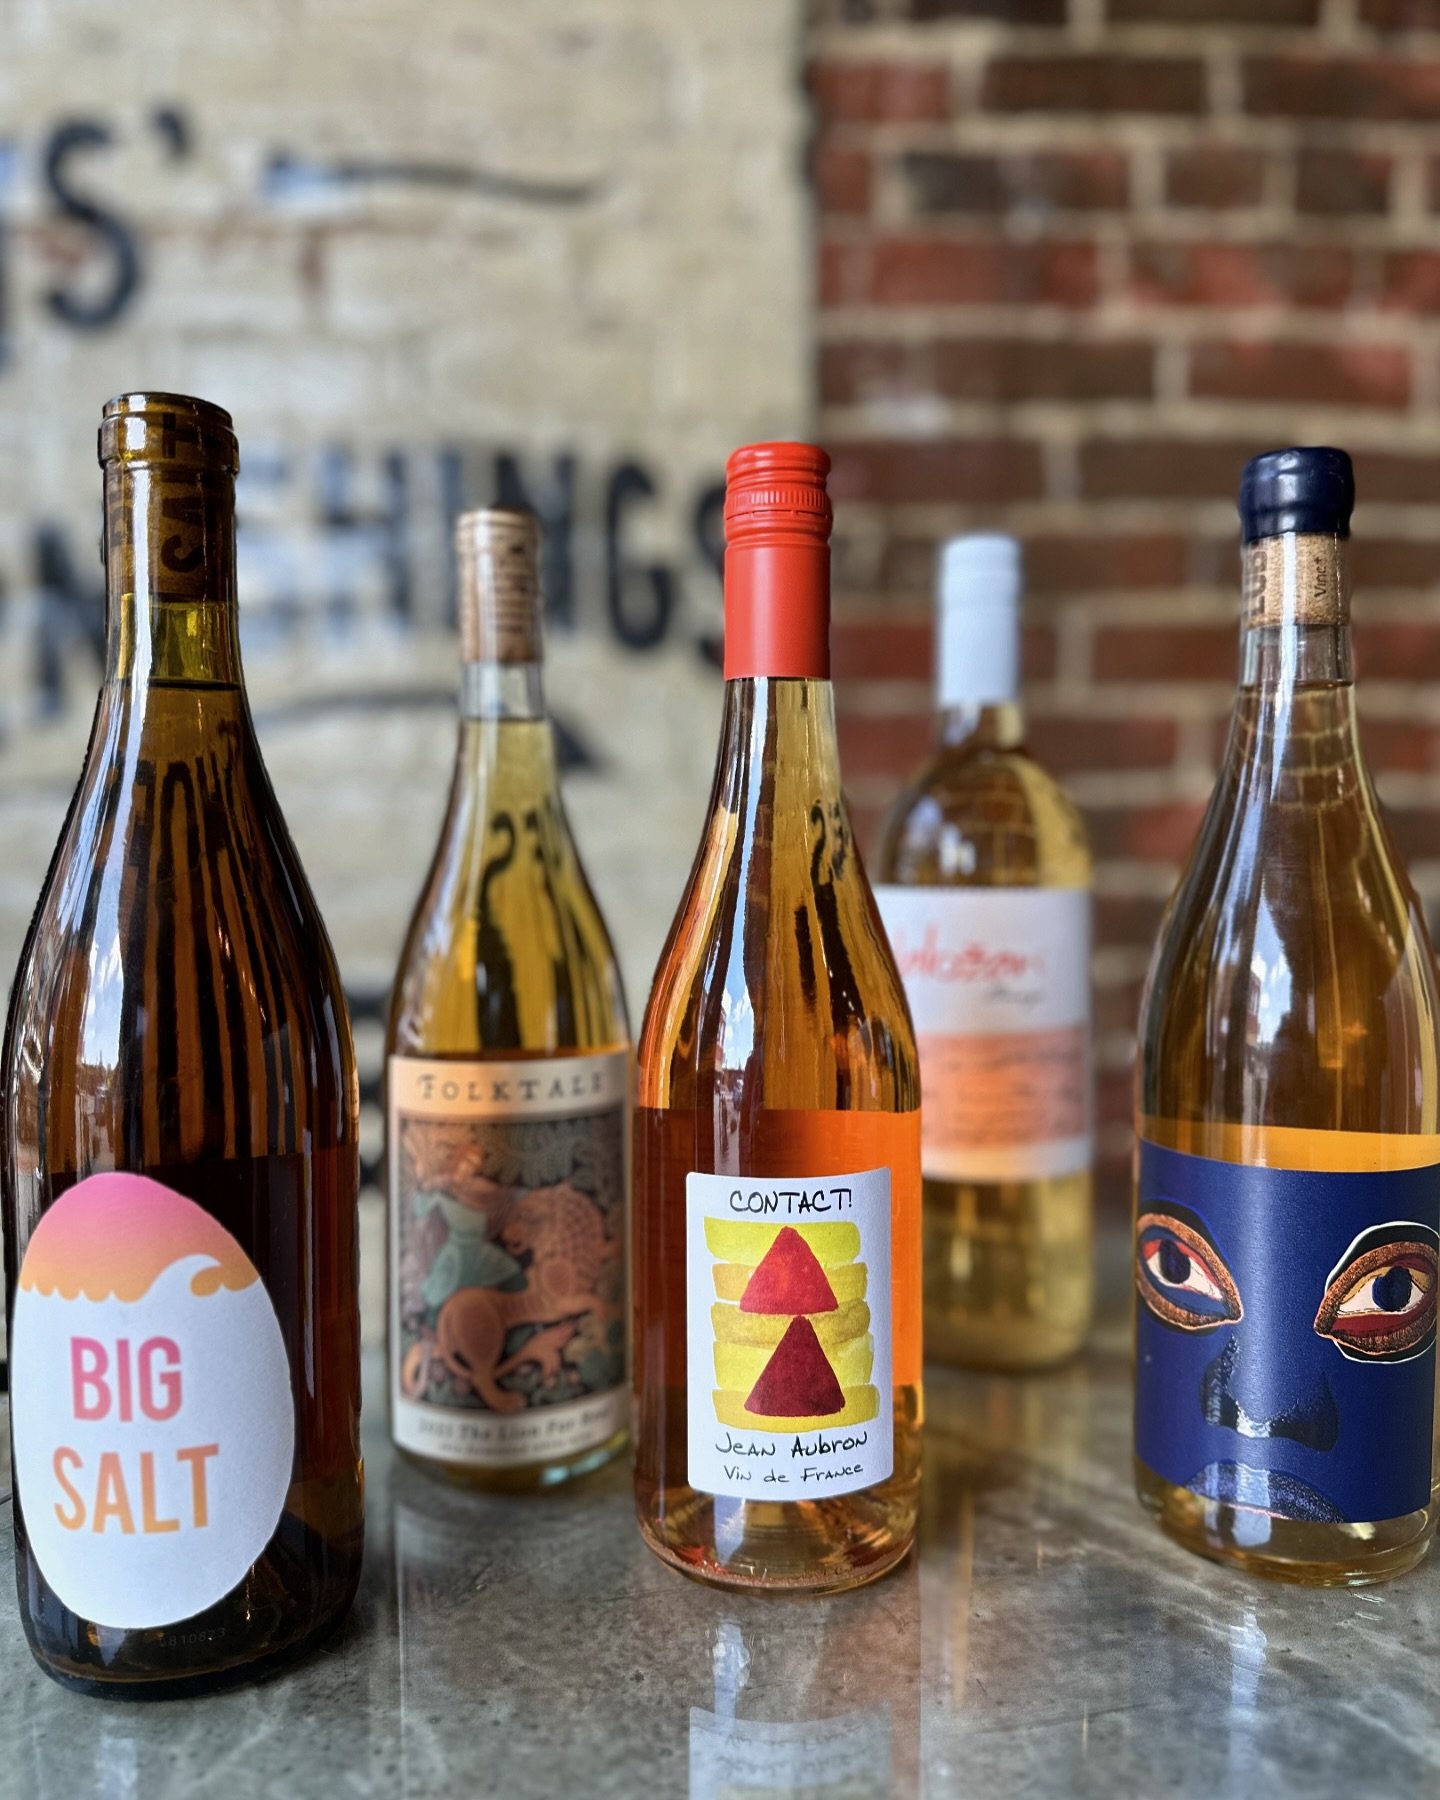 Talk + Taste: Orange Wine

This Saturday 05.18 from 1:00-3:00 we&rsquo;re going to taste through 5 Orange Wine from our list. All different flavor profiles, all fun to drink. Reservations can be made right through the link in our bio!

Walk-Ins Welco